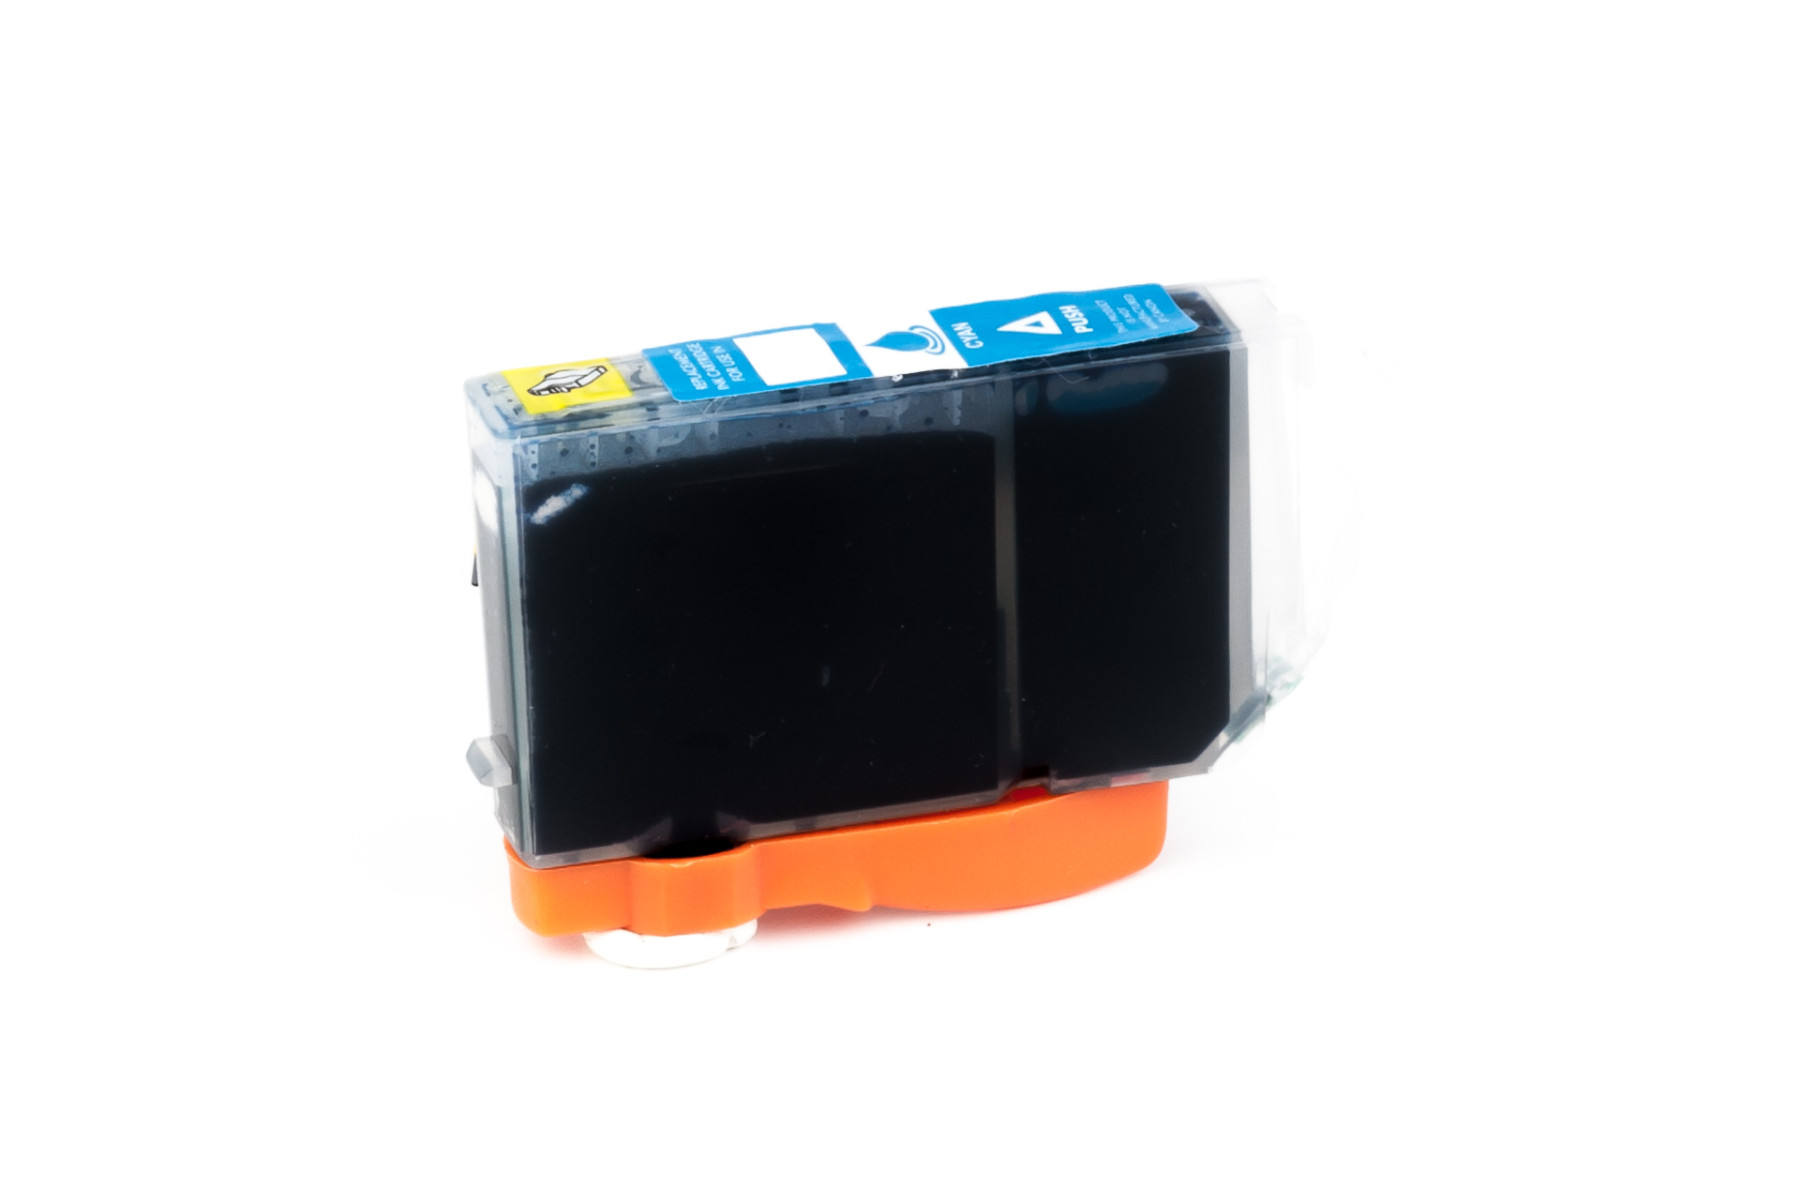 Set consisting of Ink cartridge (alternative) compatible with Canon CLI-8 black, cyan, magenta, yellow - Save 6%